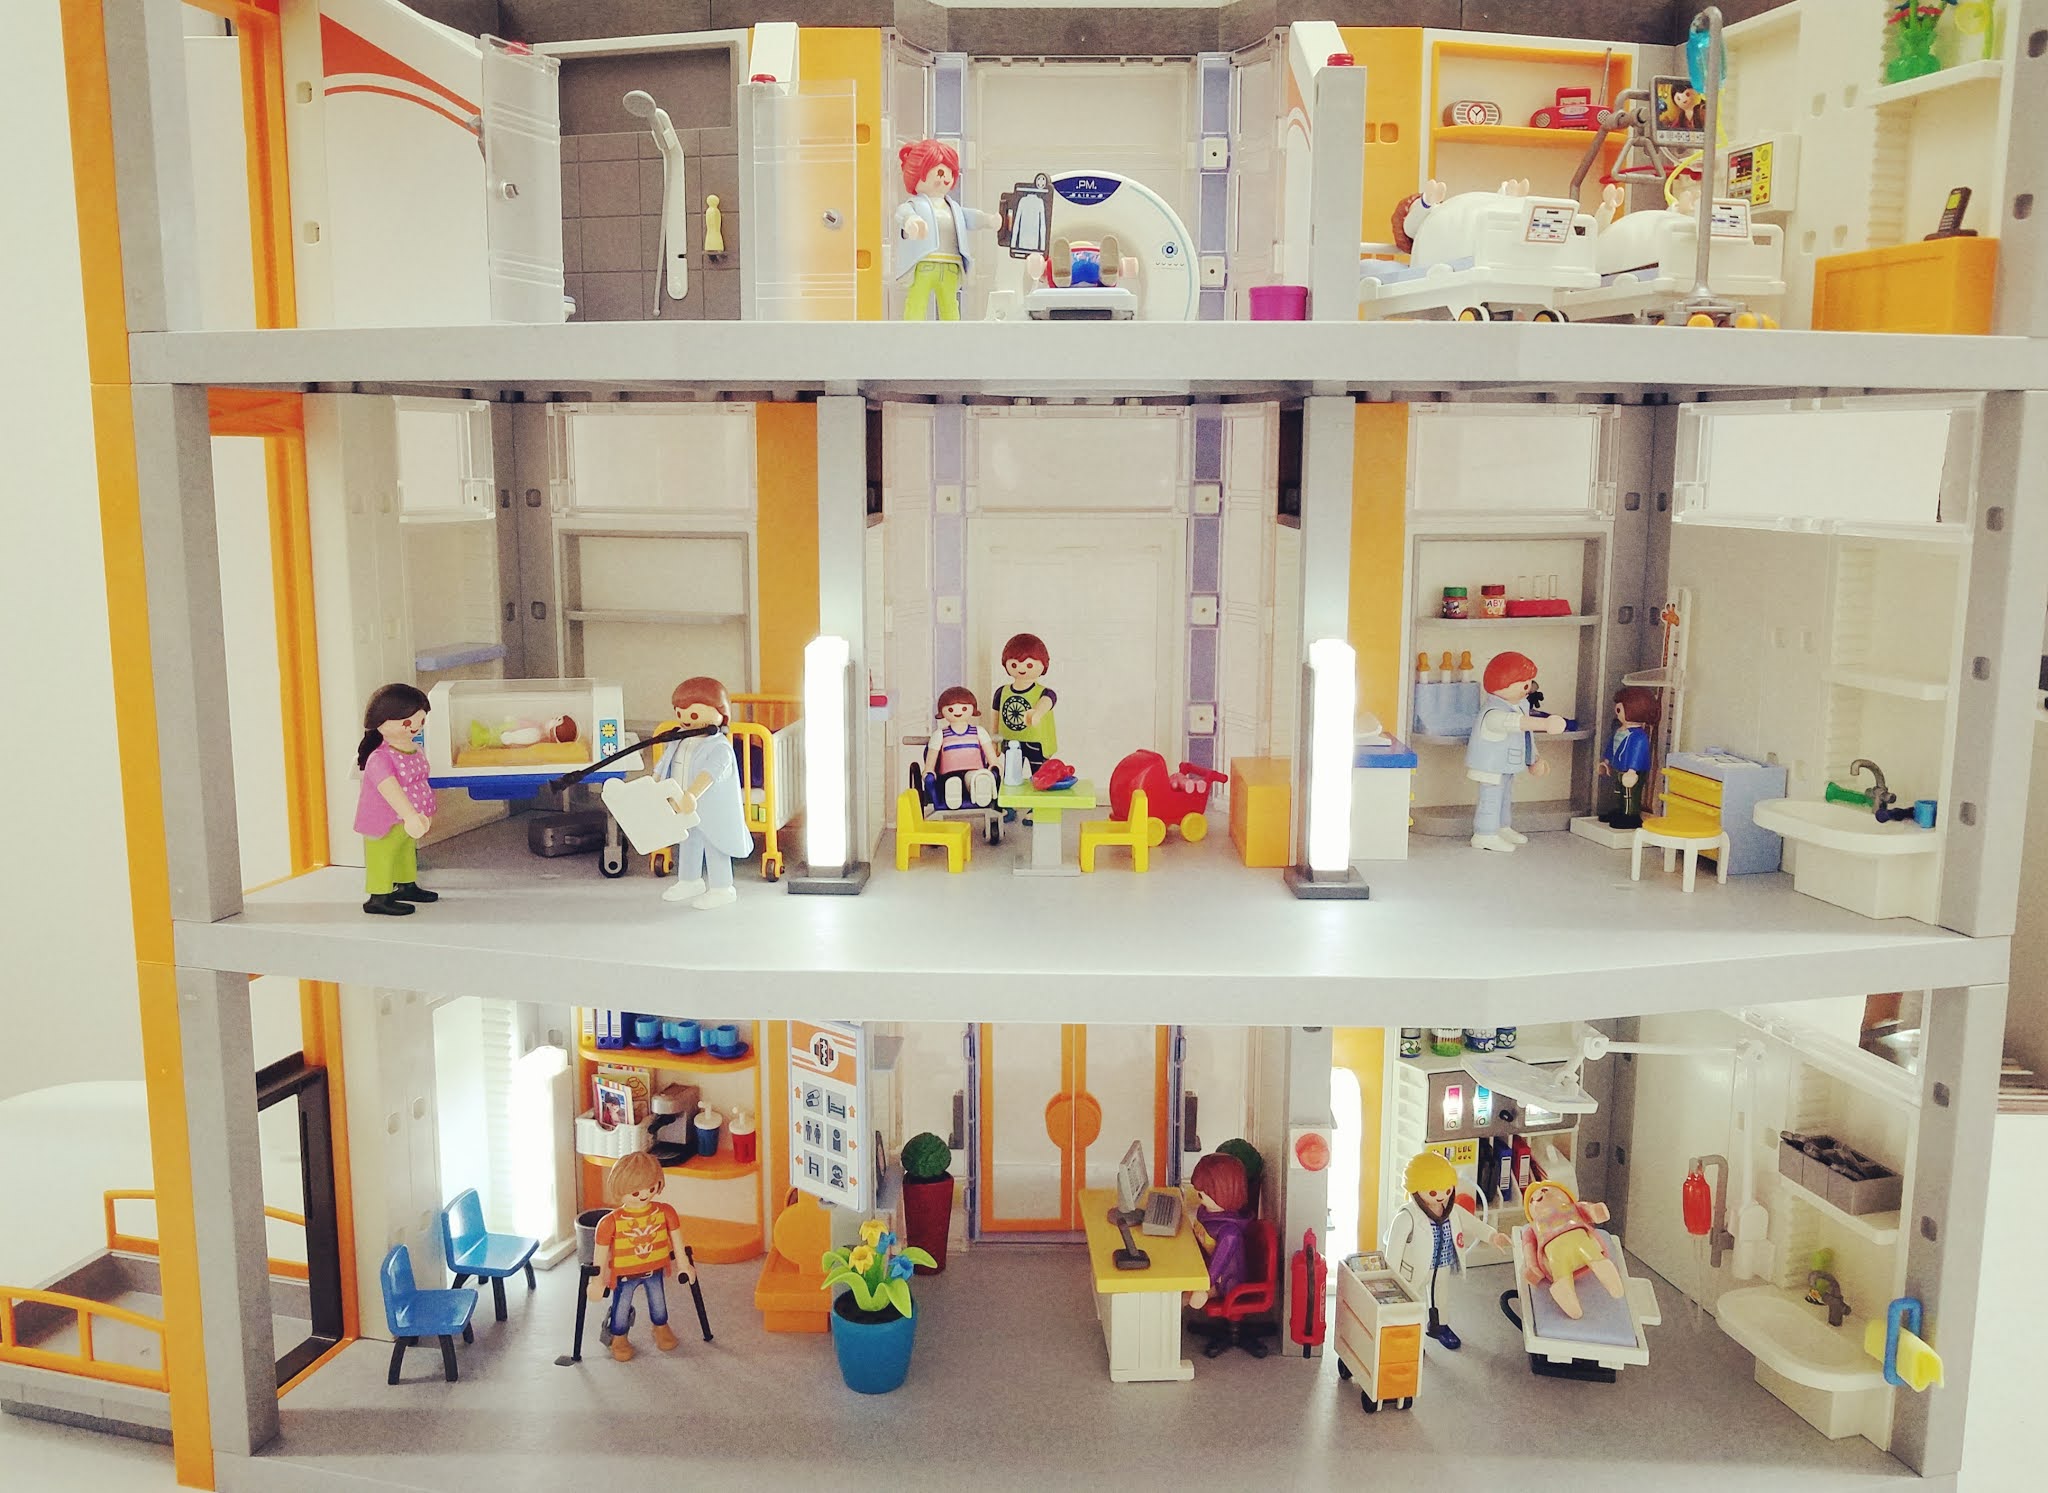 Jane Chérie: A Review of the Playmobil Hospital